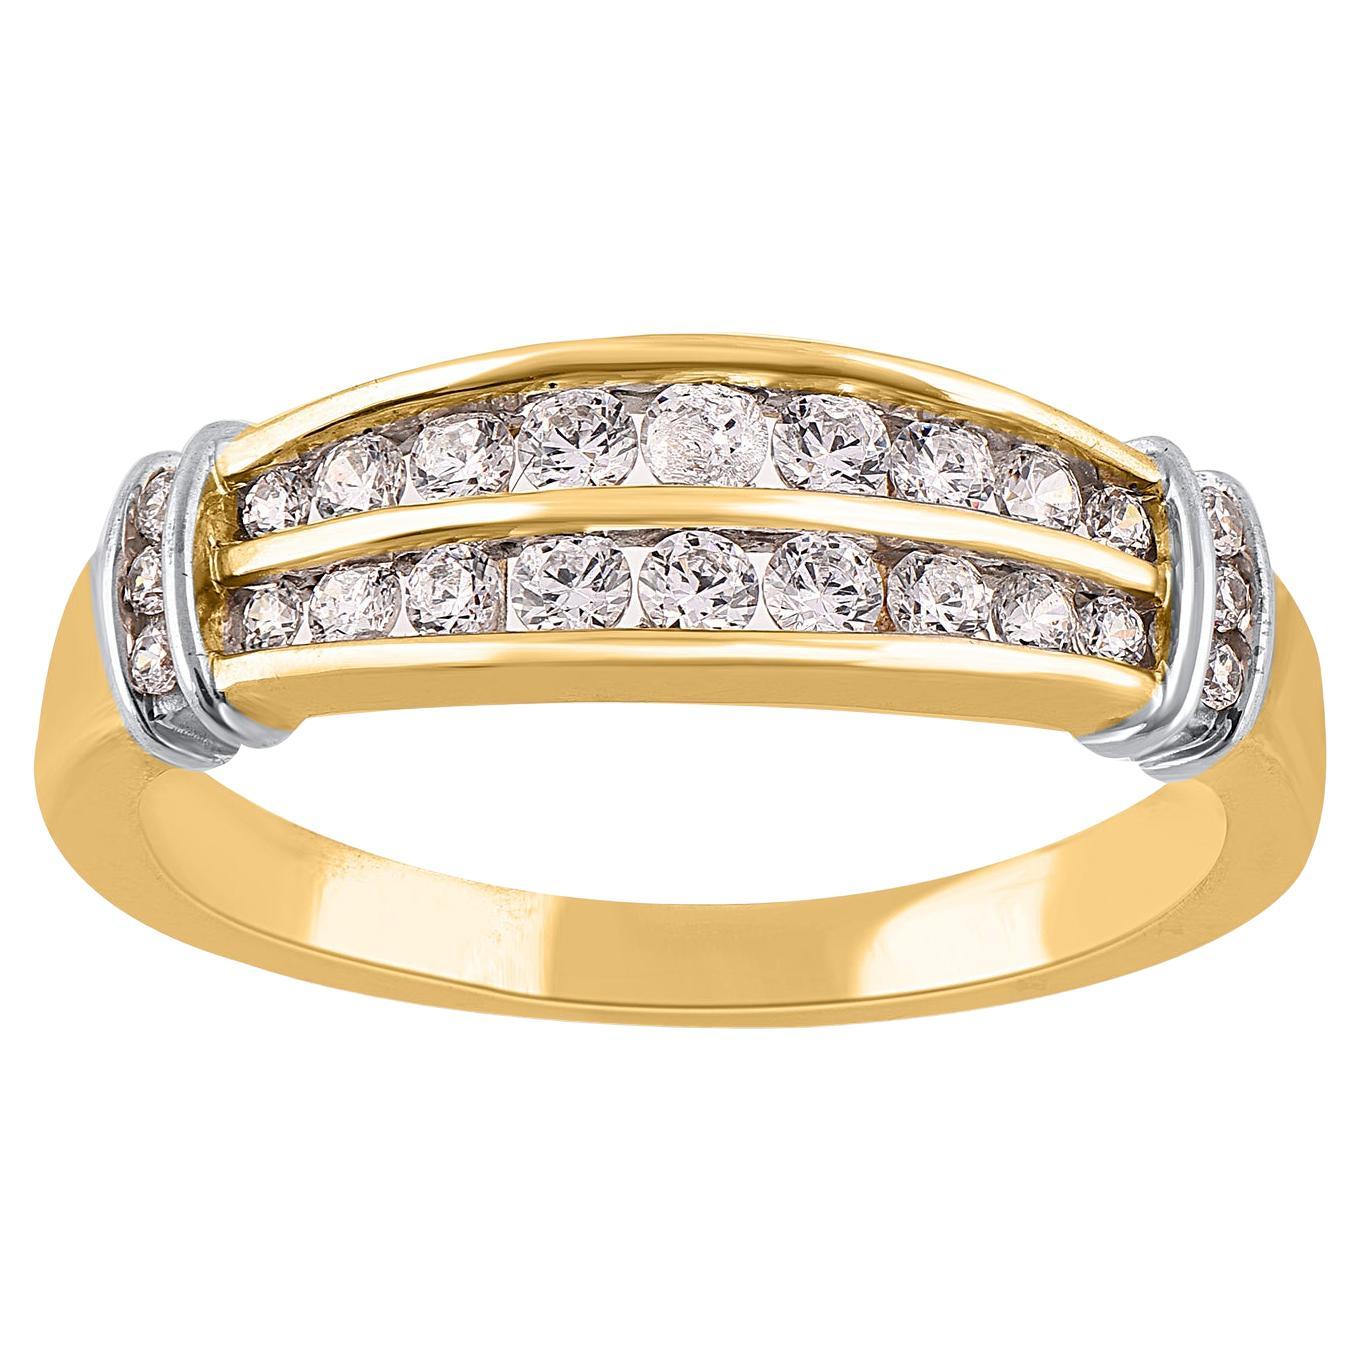 TJD 0.50 Carat Brilliant Cut Diamond Two Row Band Ring in 14 Karat Yellow Gold For Sale